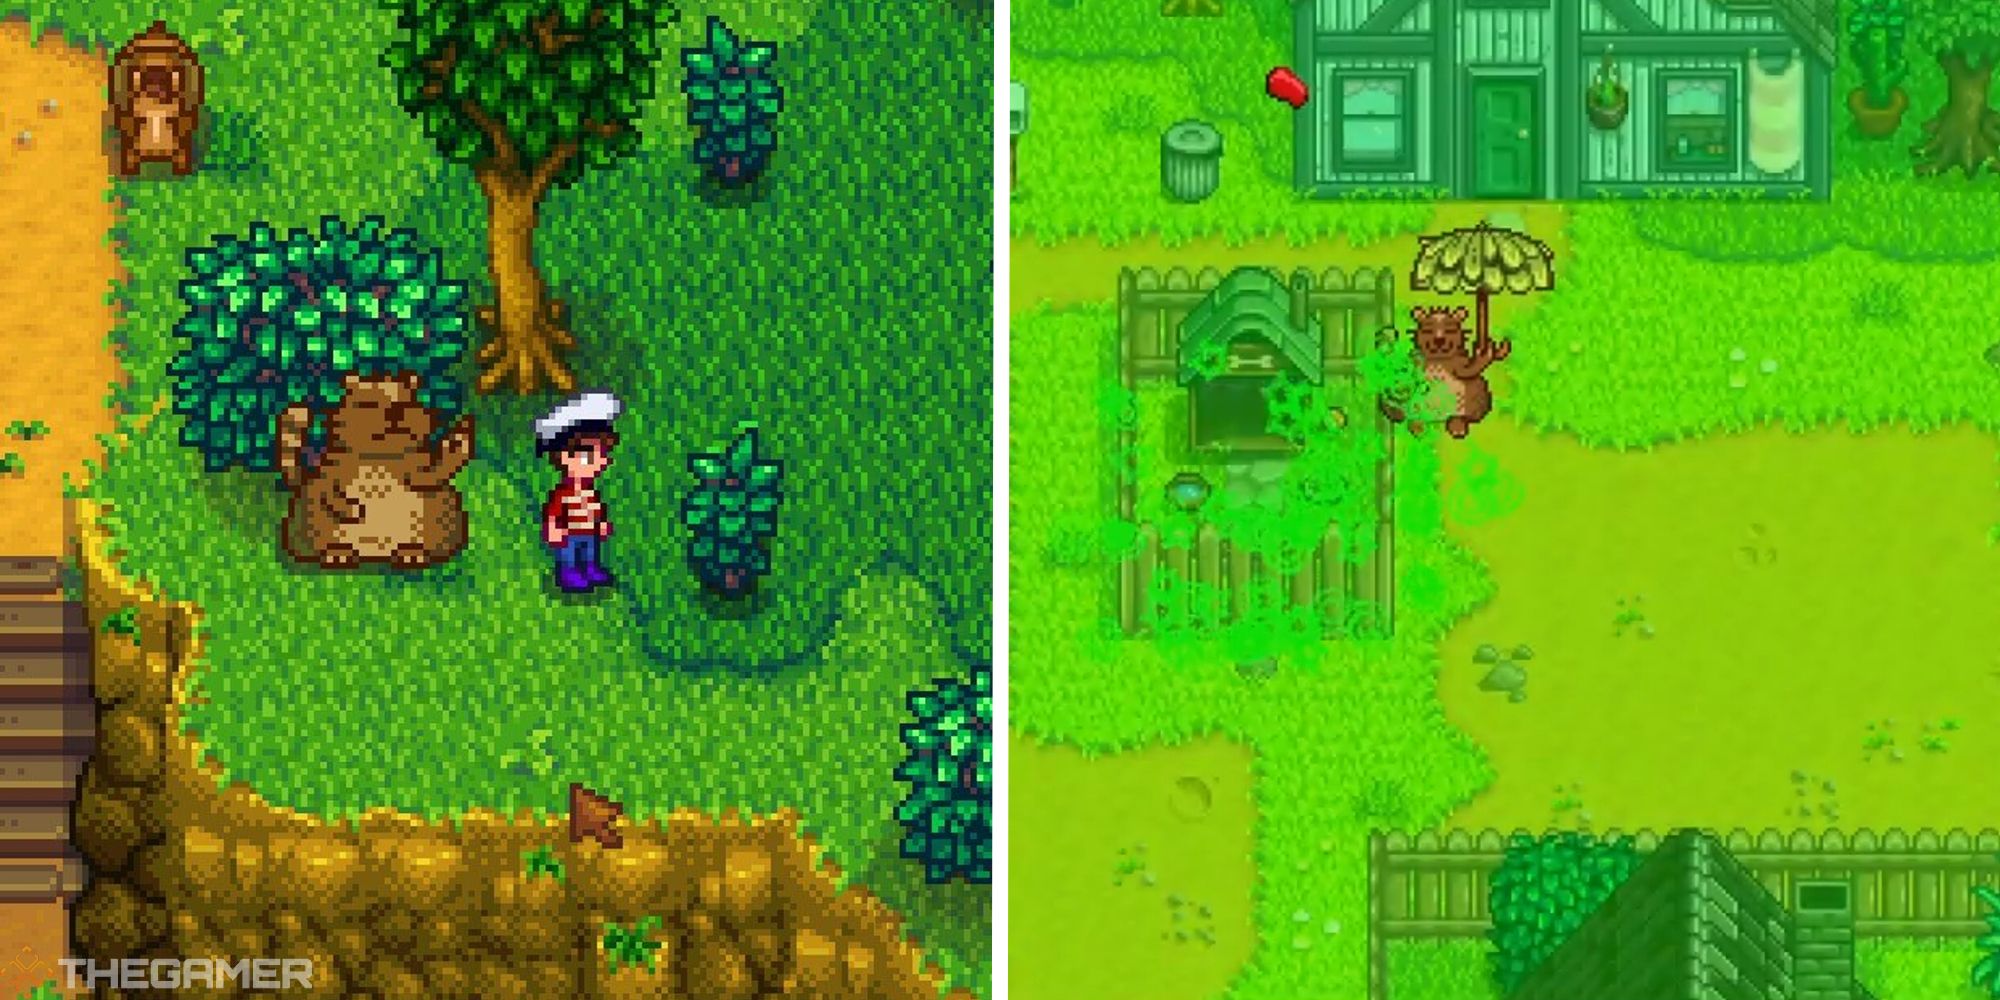 How To Complete Trash Bear's Quests Tasks In Stardew Valley